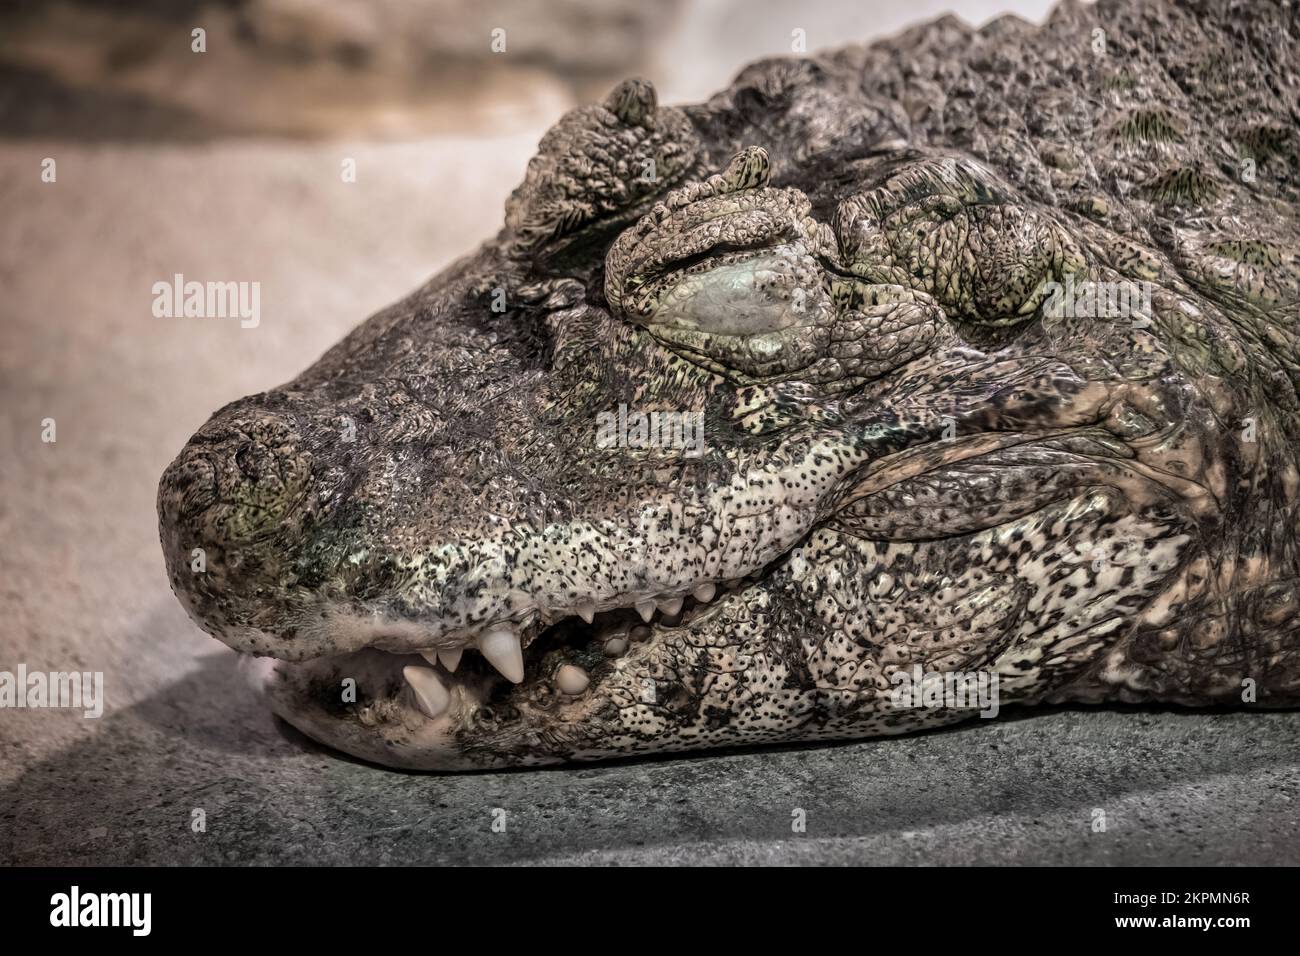 Head of the Broad-snouted caiman (Caiman latirostris) with closed eyes, crocodilian in the family Alligatoridae, native region: eastern and central So Stock Photo